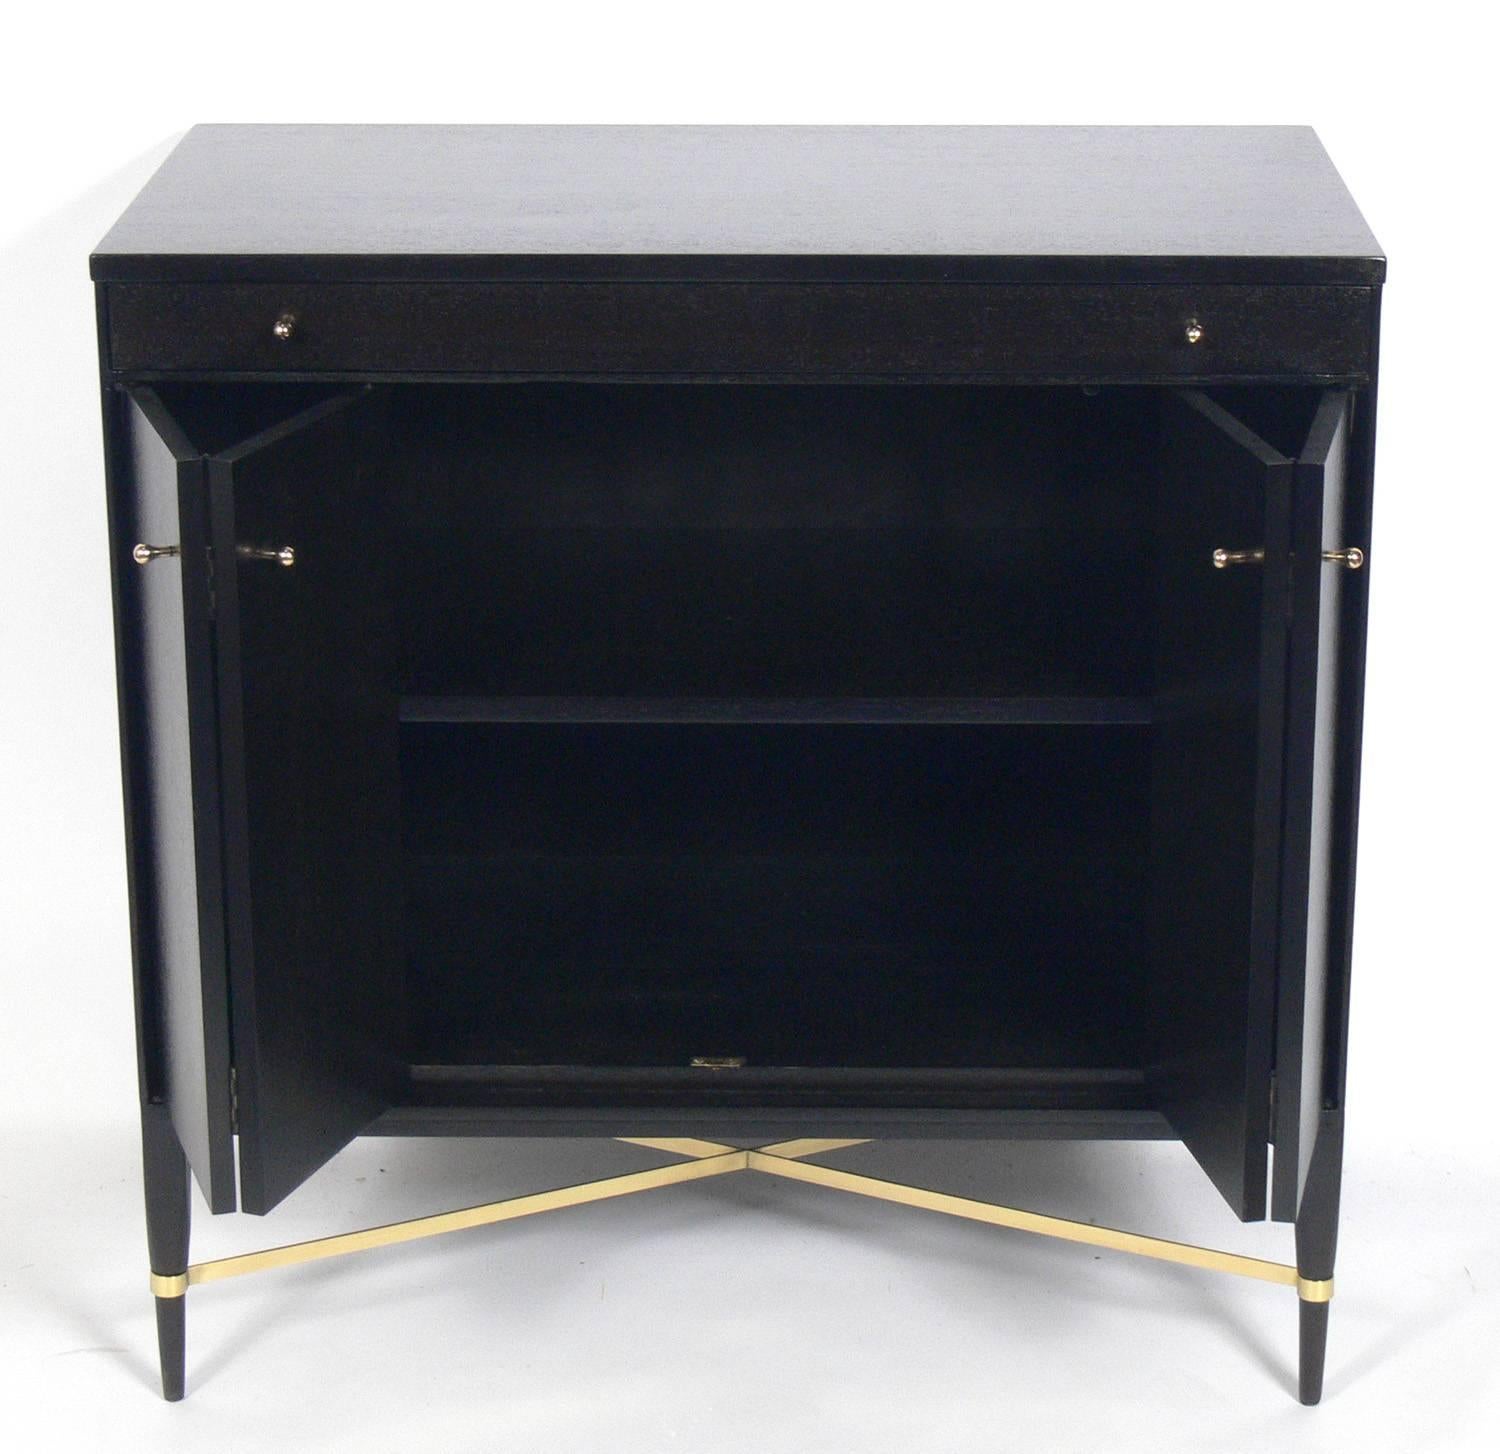 Mid-Century Modern cabinet, designed by Paul McCobb for Calvin, American, circa 1950s. It has been completely restored in an ultra deep brown color with the brass hardware polished and lacquered. It is a versatile size and can be used as a credenza,